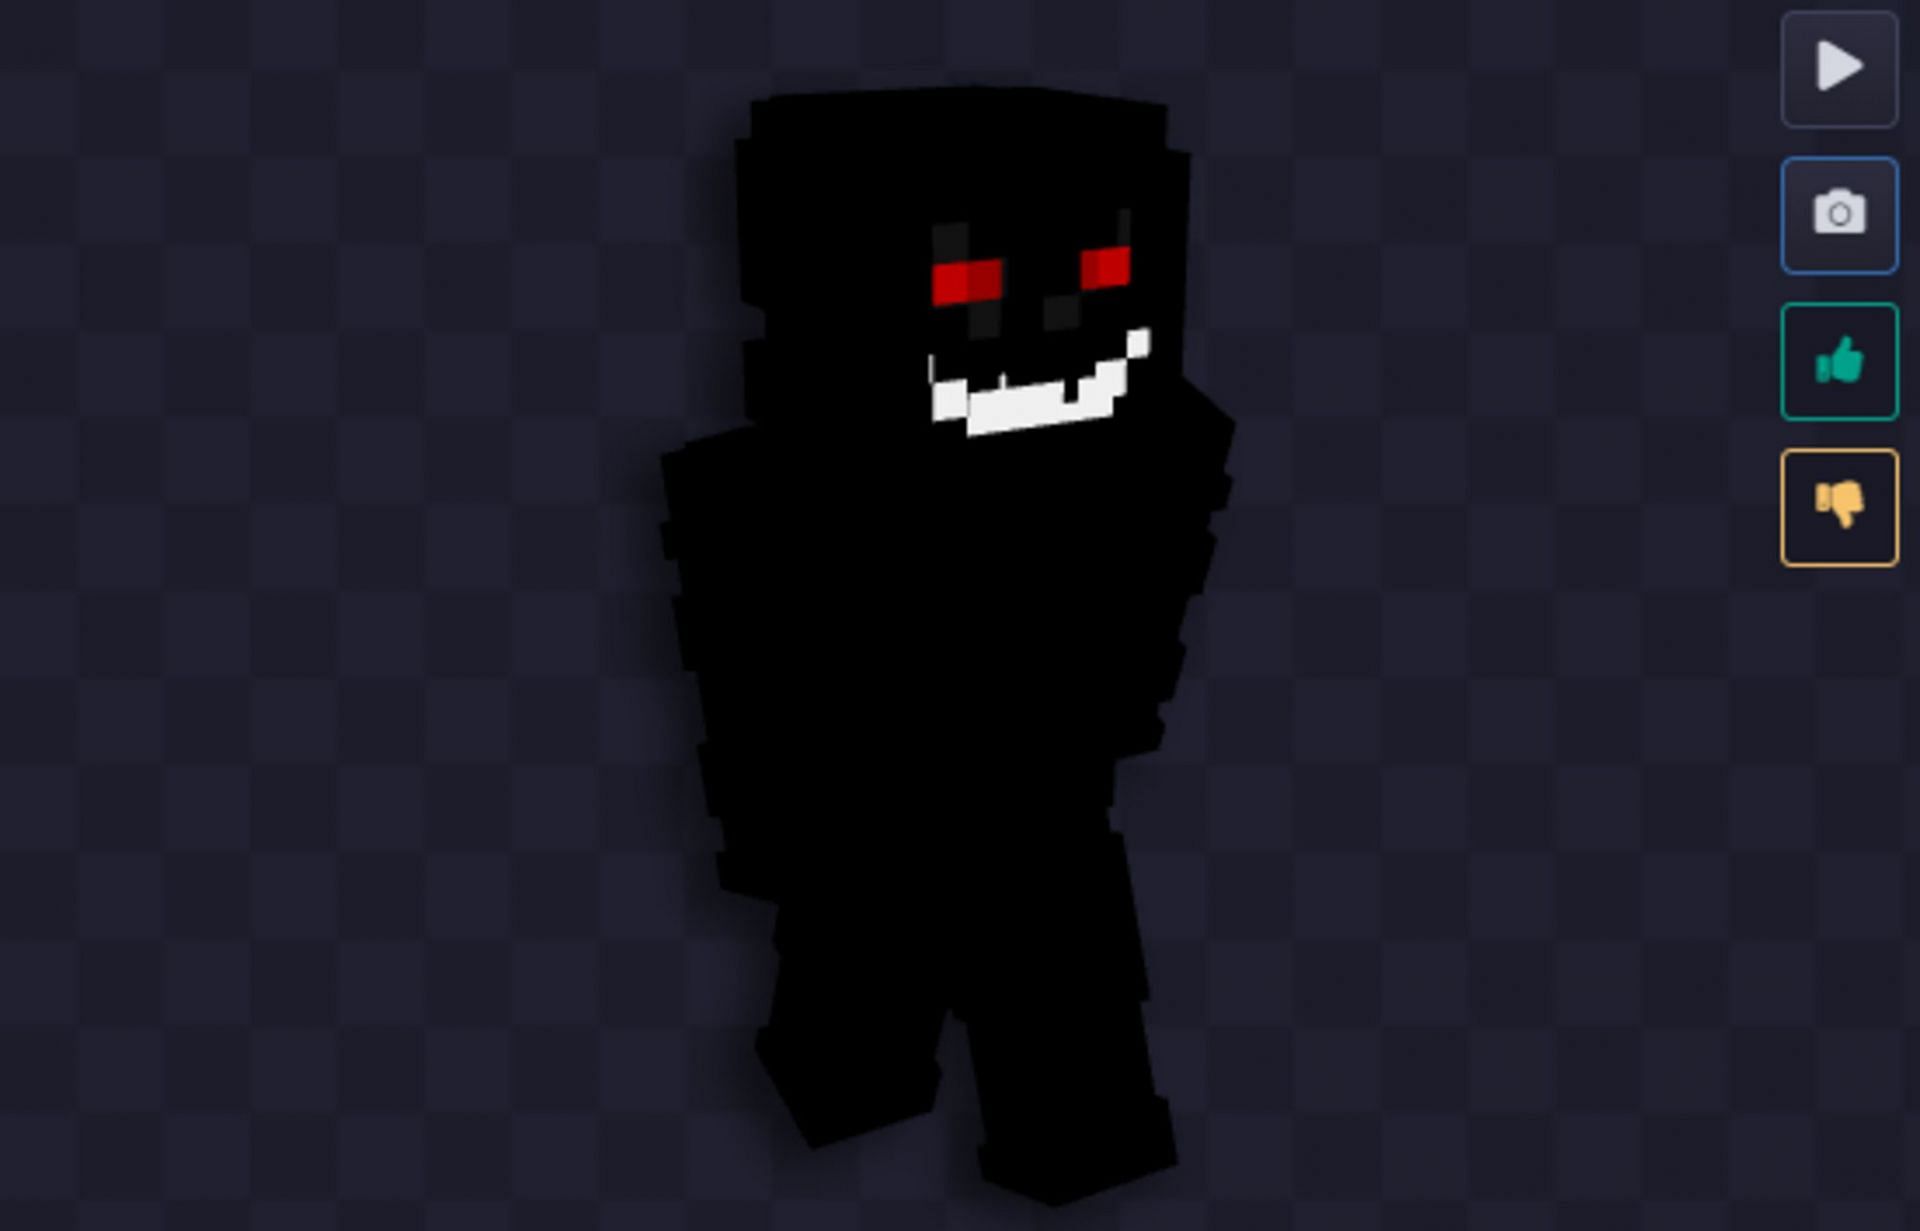 This Minecraft skin from wolf11131590 has been worn by 1 player. It was  first seen on July 29, 2022.